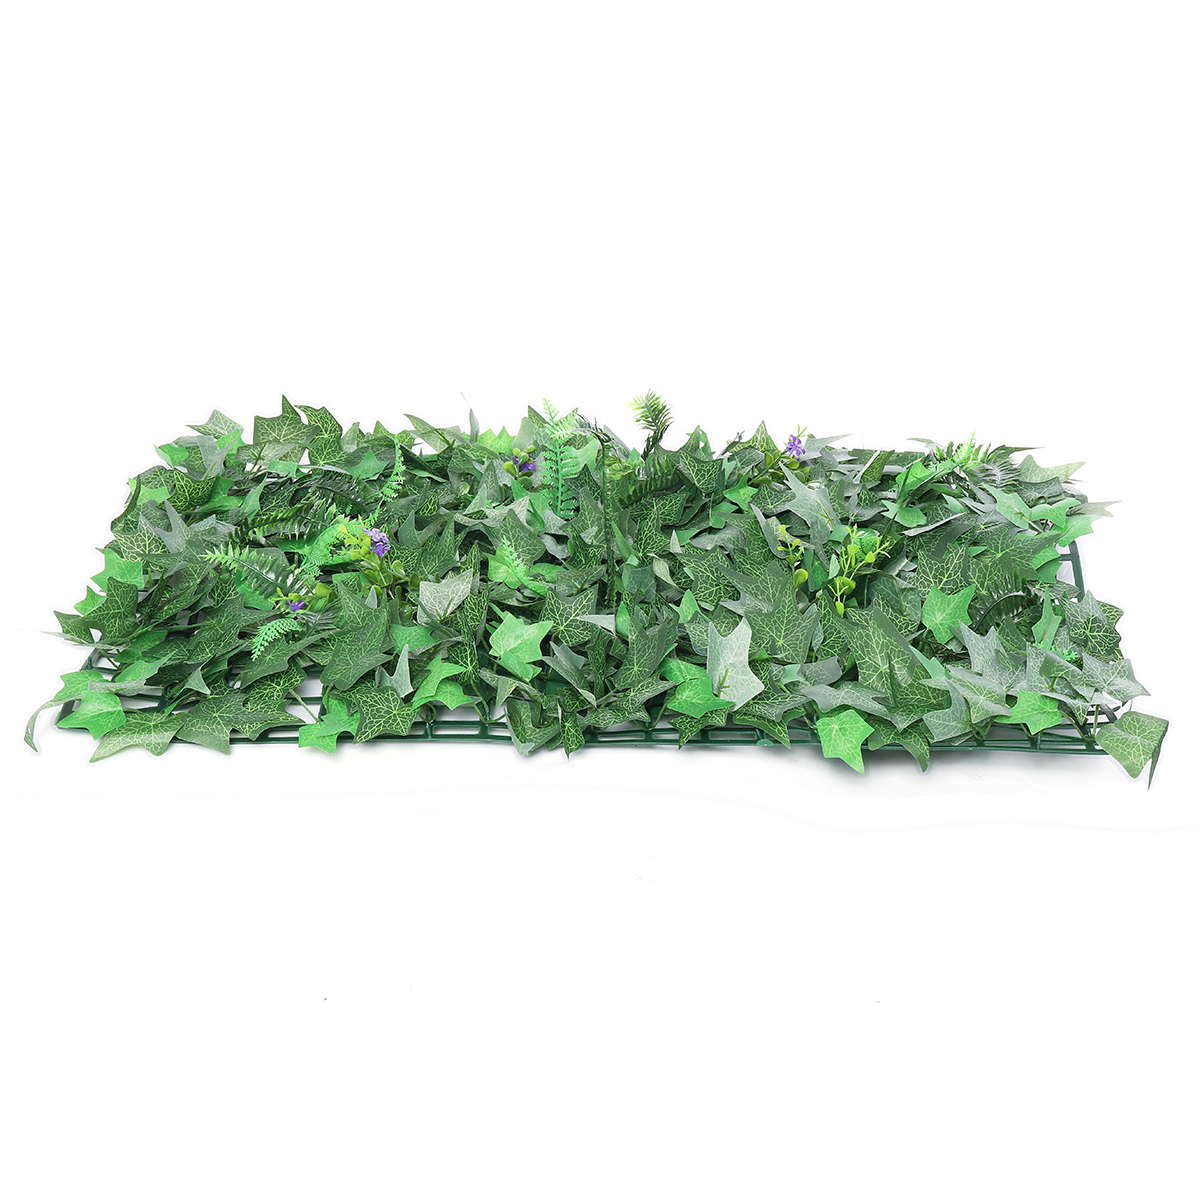 Green-Plant-Wall-Background-Wall-Plastic-Simulation-Plant-Lawn-Wall-1731398-24